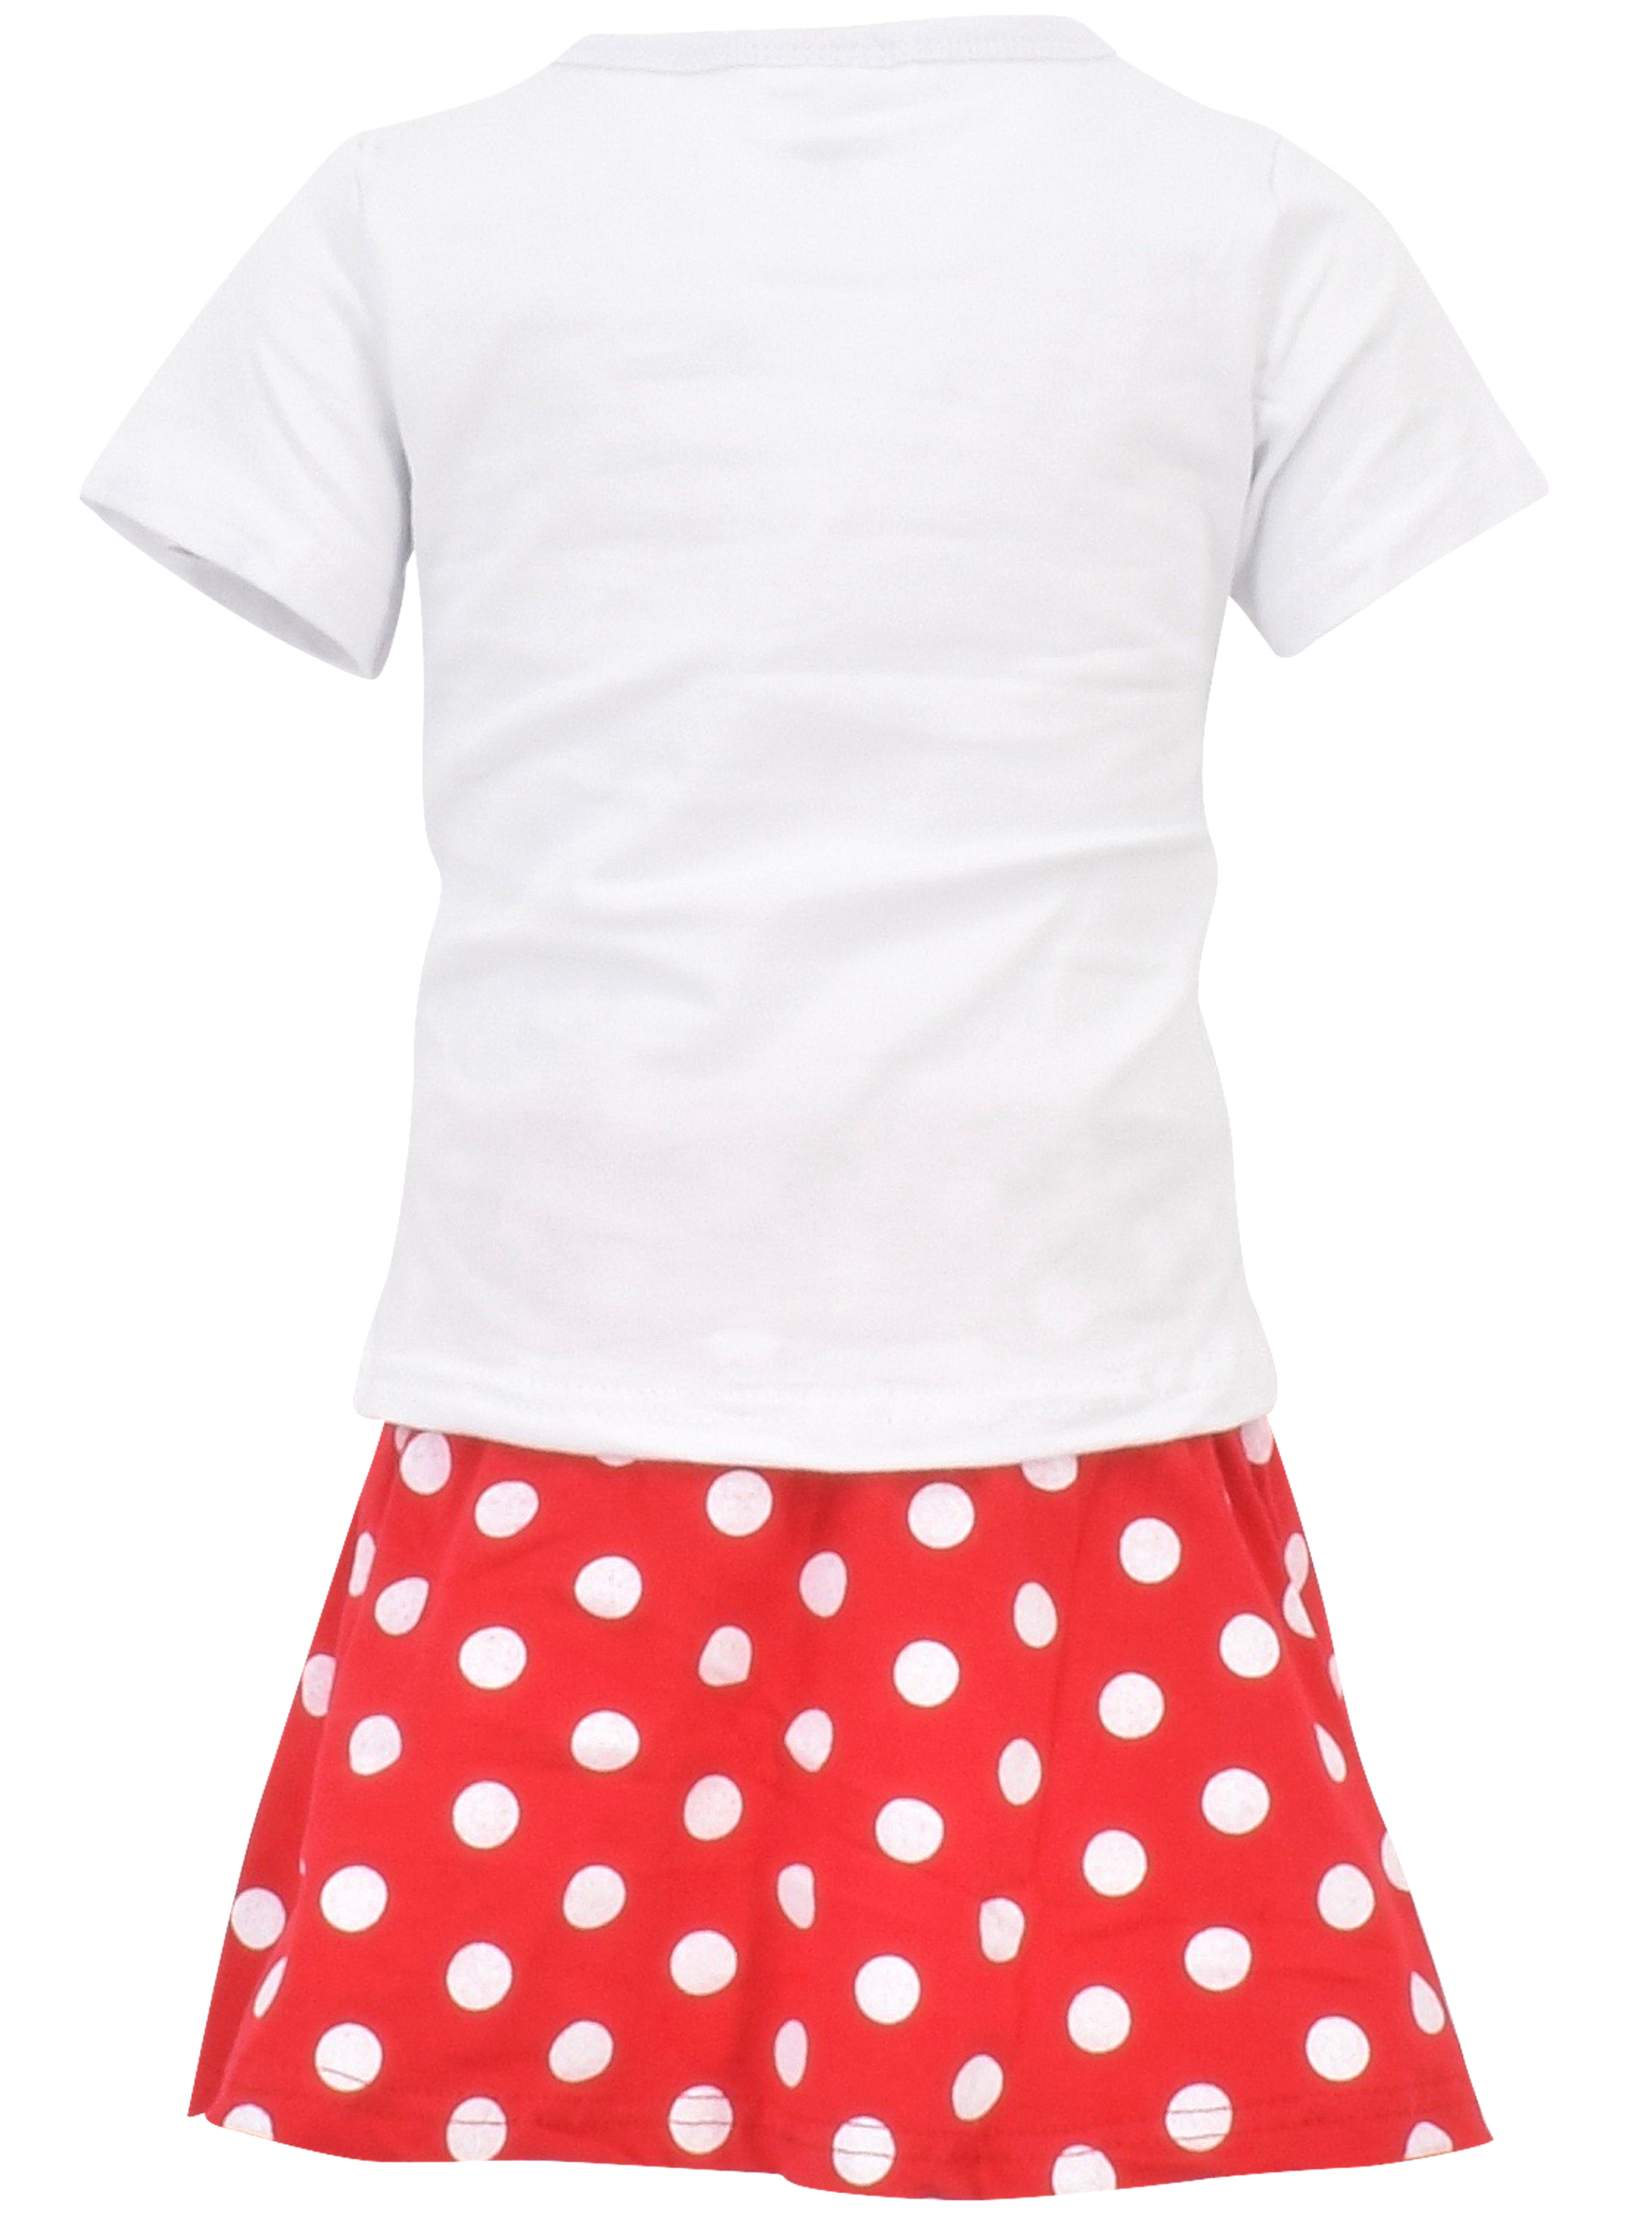 Unique Baby Girls Back to School Apple Skirt Boutique Outfit (4T/M, Red) - image 3 of 4